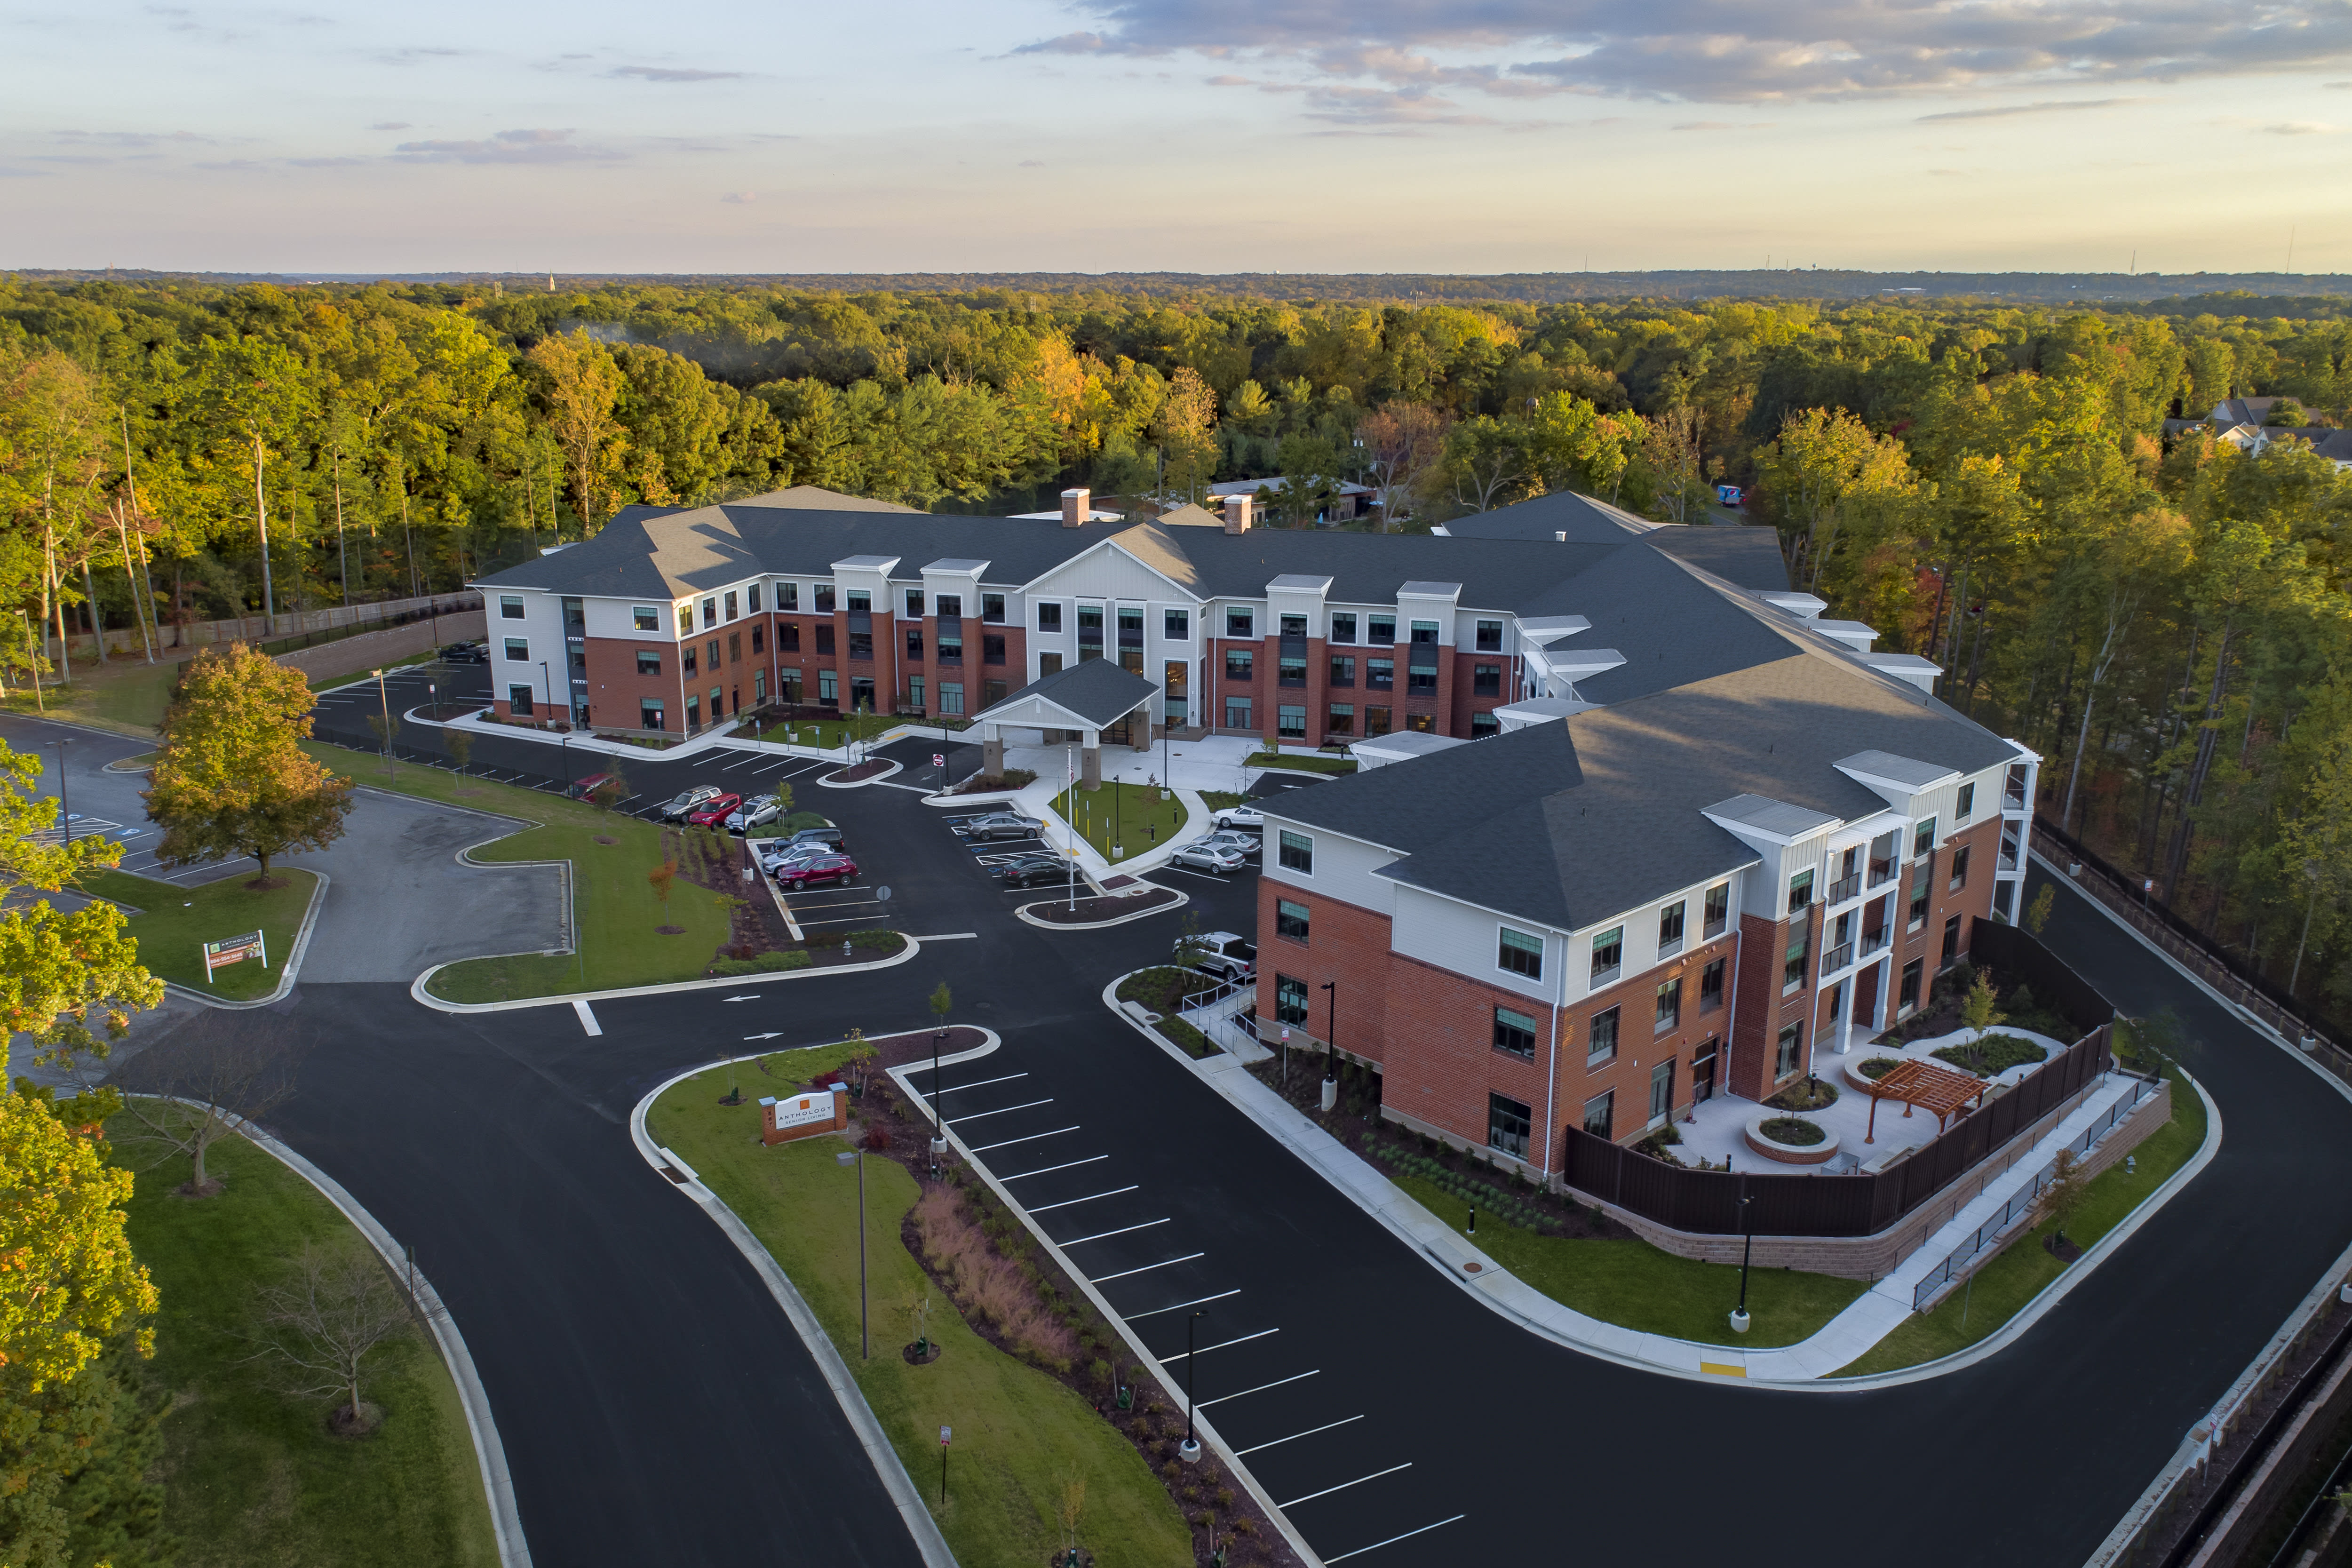 Elance at Tuckahoe aerial view of community